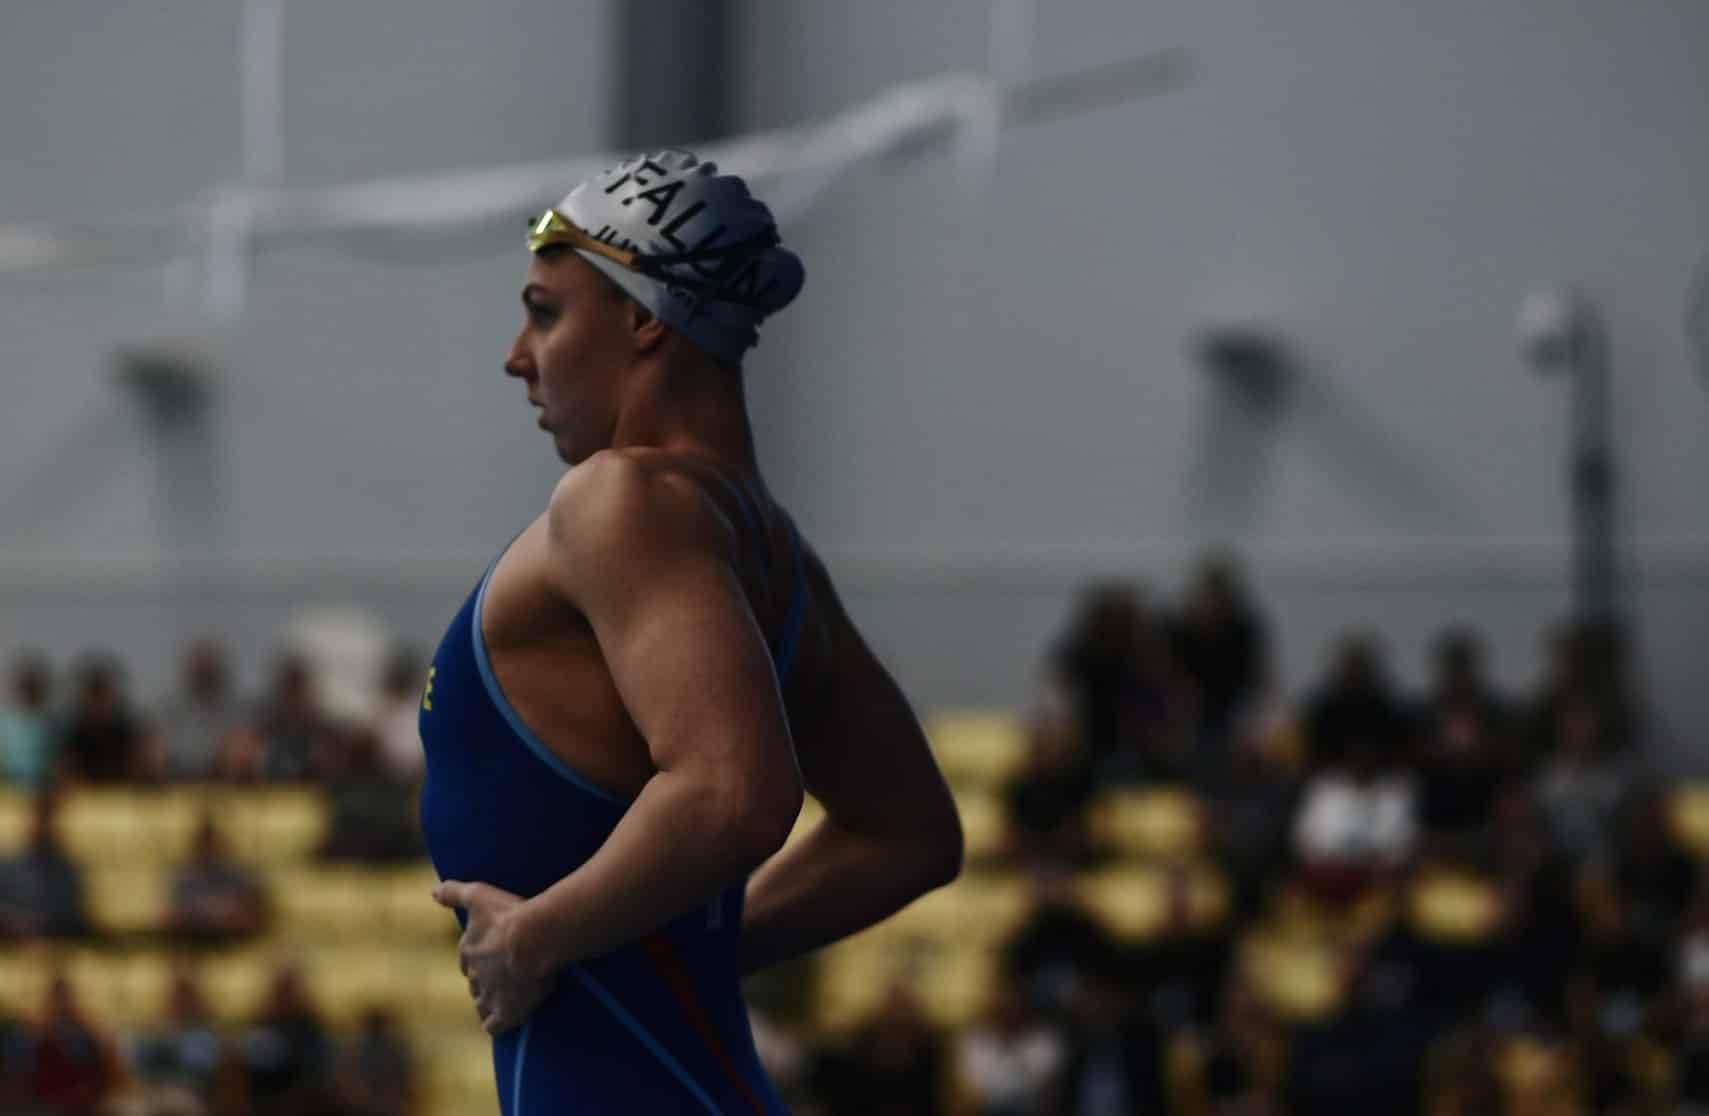 Sara Junevik interviewed about background, long-termism and swimming career